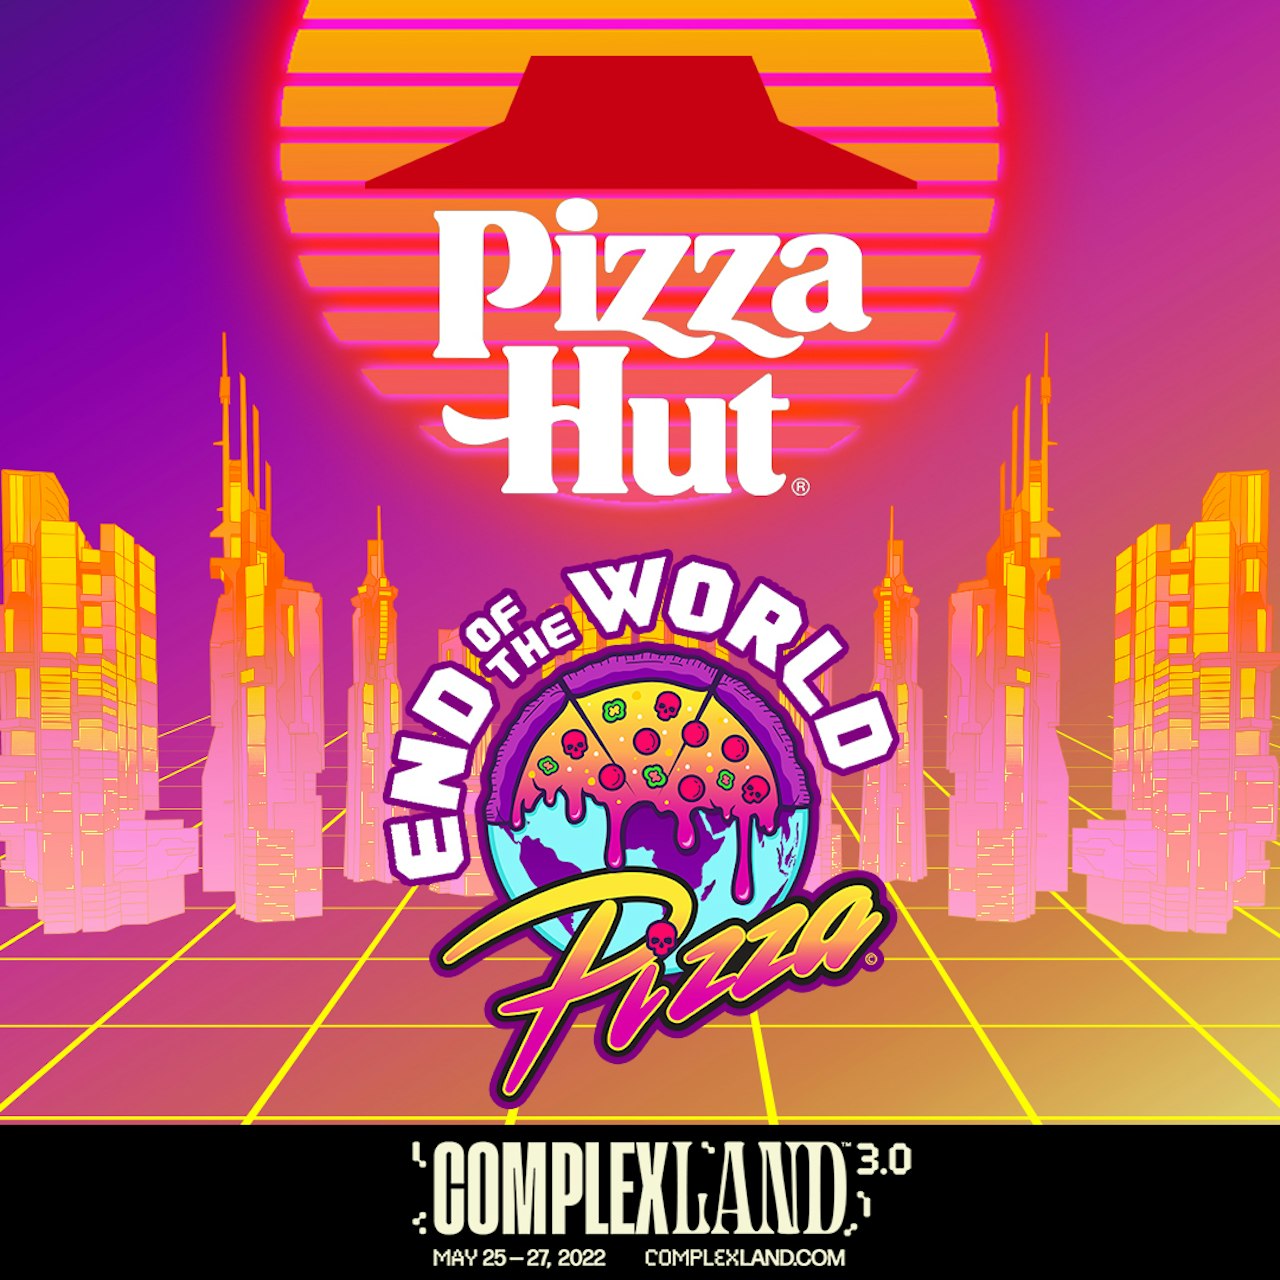 Pizza Hut's move from Web 2 to Web 3 made it a big cheese in the metaverse - here's how